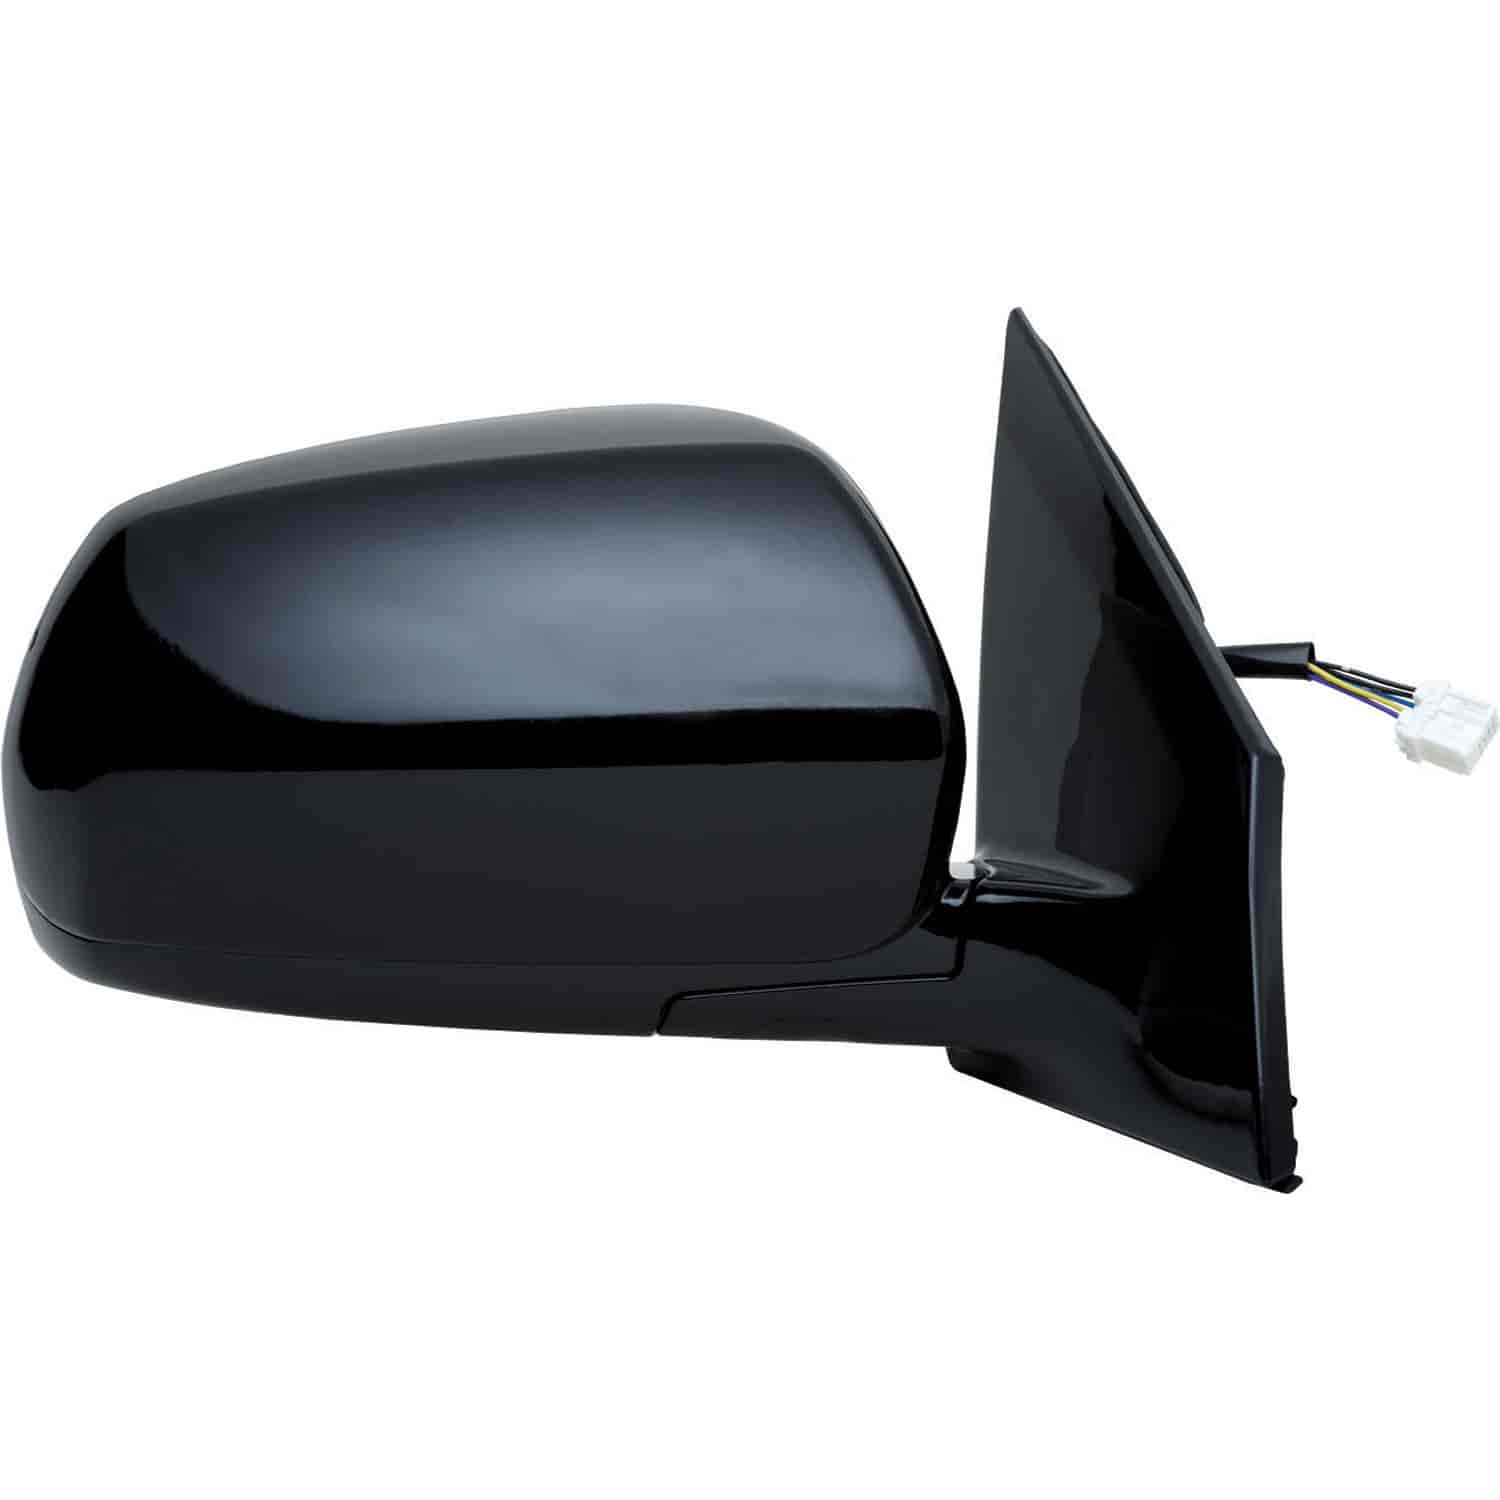 OEM Style Replacement mirror for 05-07 Nissan Murano passenger side mirror tested to fit and functio